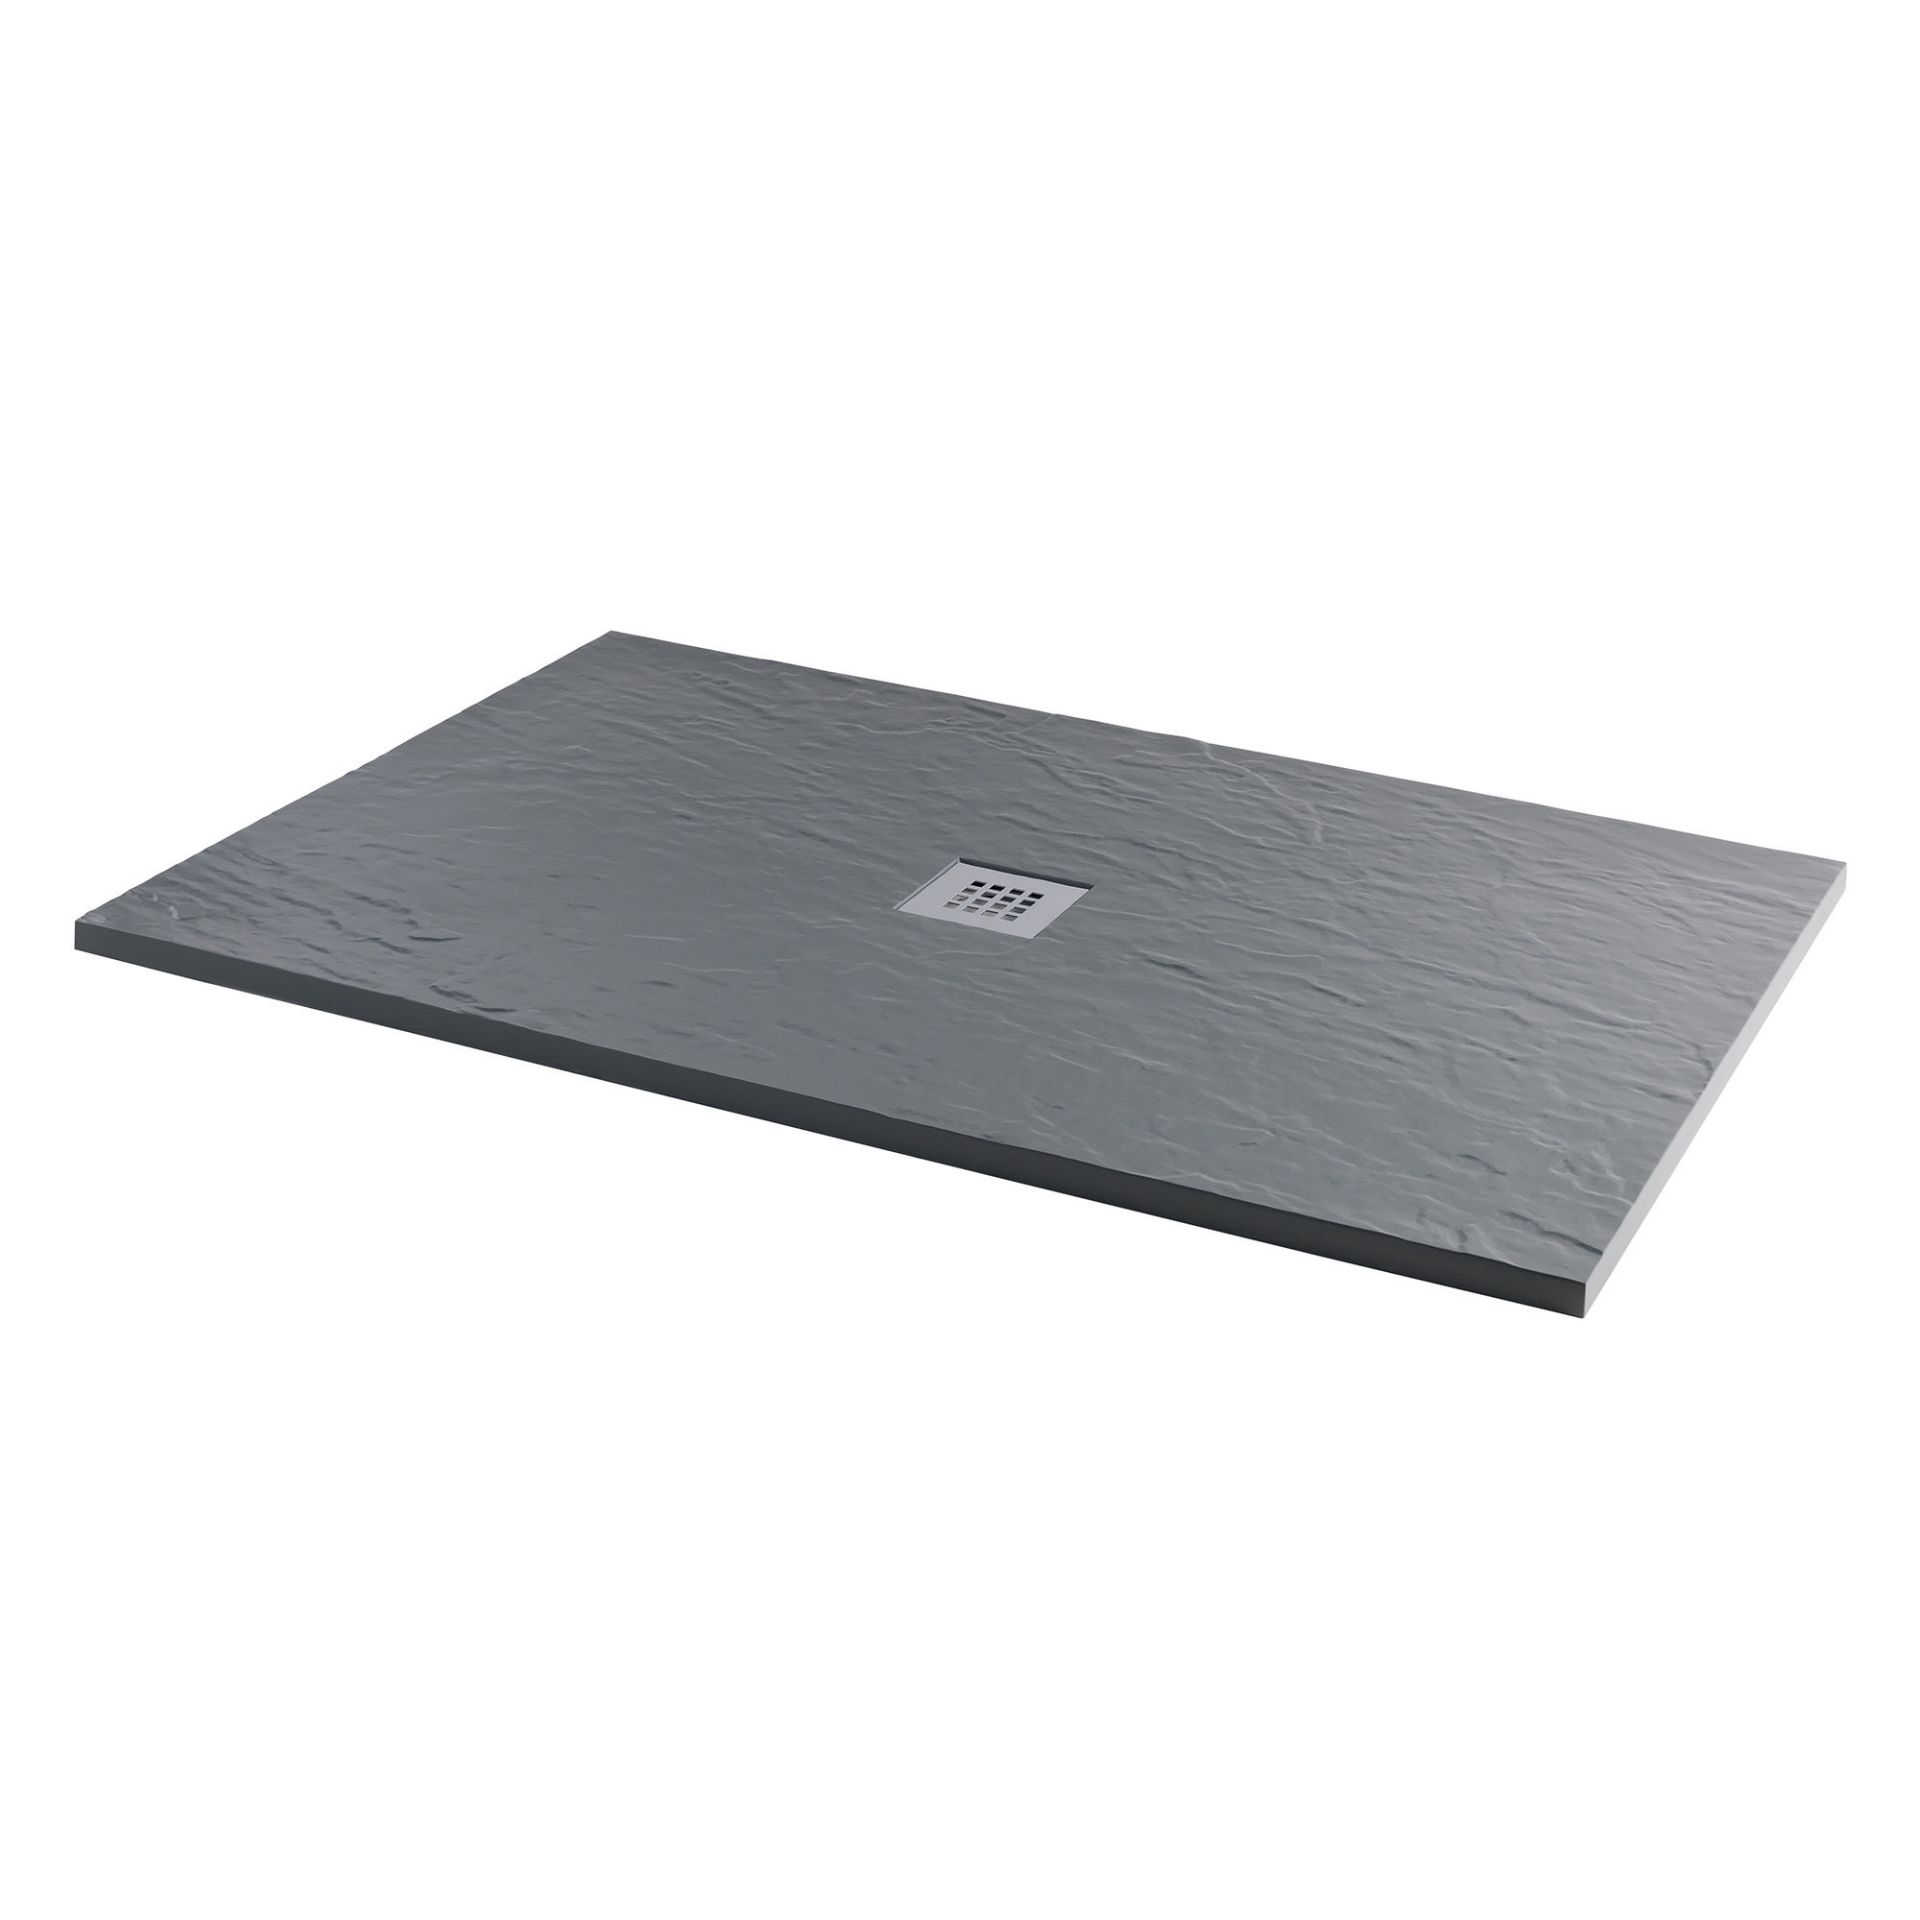 New (Q53) 1200x900 mm Rectangular Slate Effect Shower Tray In Grey. Manufactured In The Uk From ... - Image 2 of 3